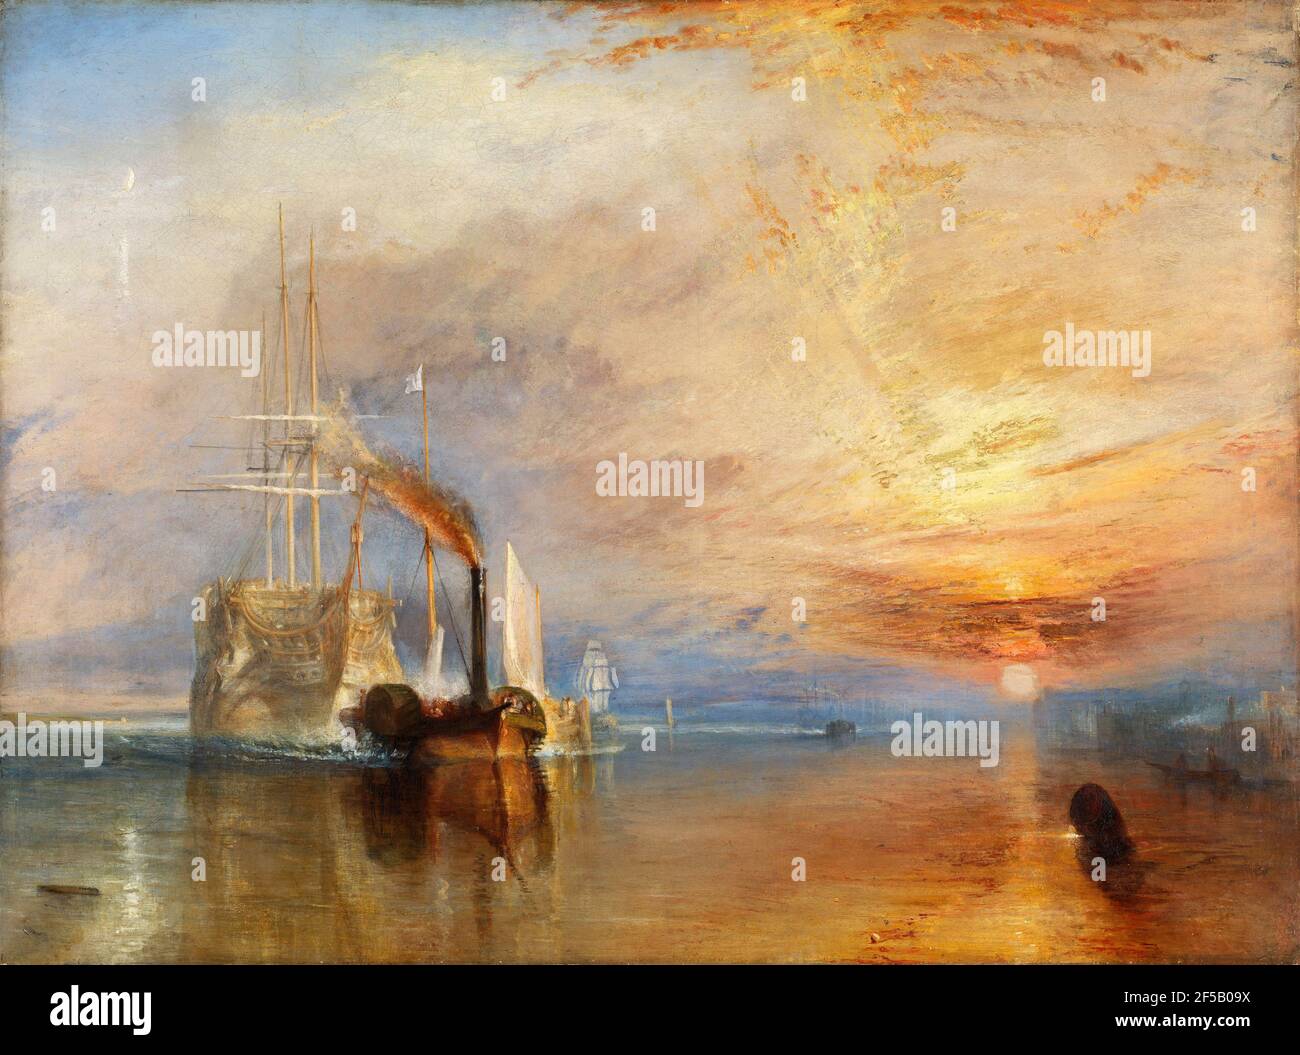 JMW Turner, The Fighting Temeraire, oil on canvas, 1839. Stock Photo